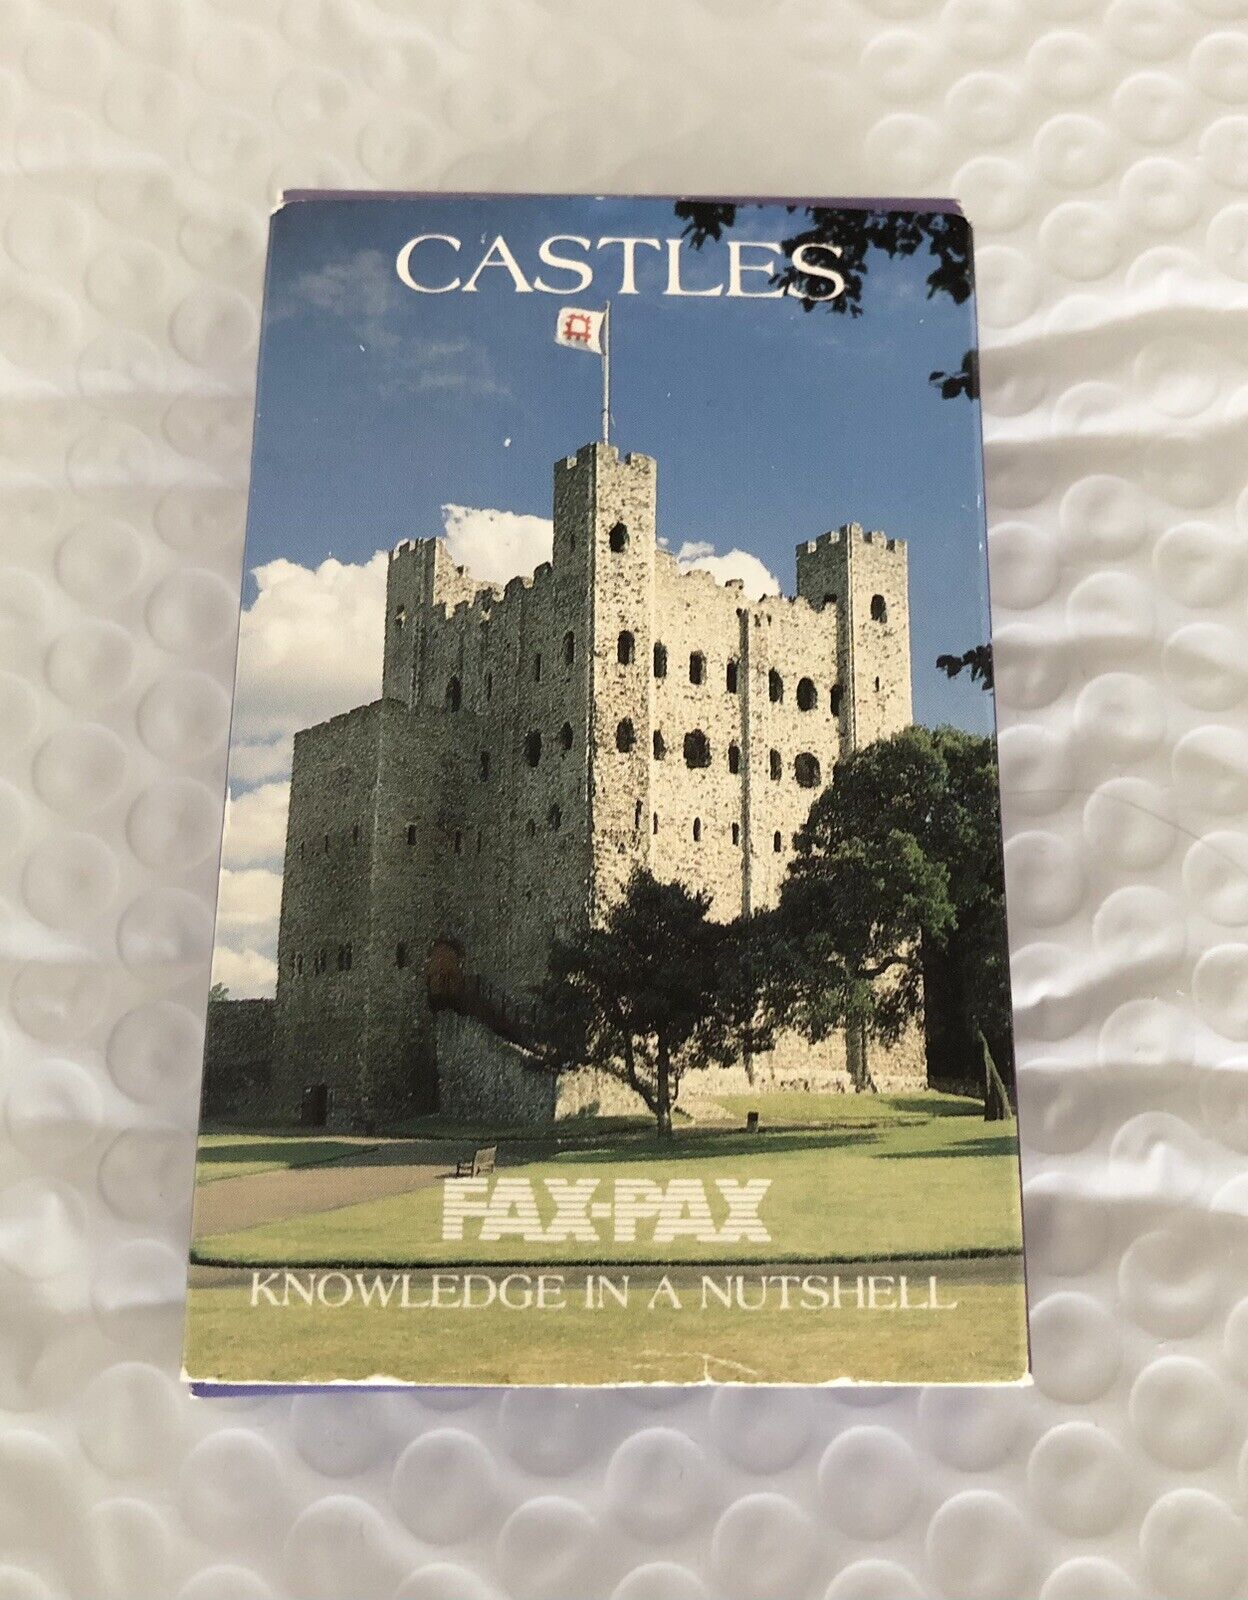 Fax Pax Britain Castles Complete Vintage 1980s Out of print 40 Cards with Box